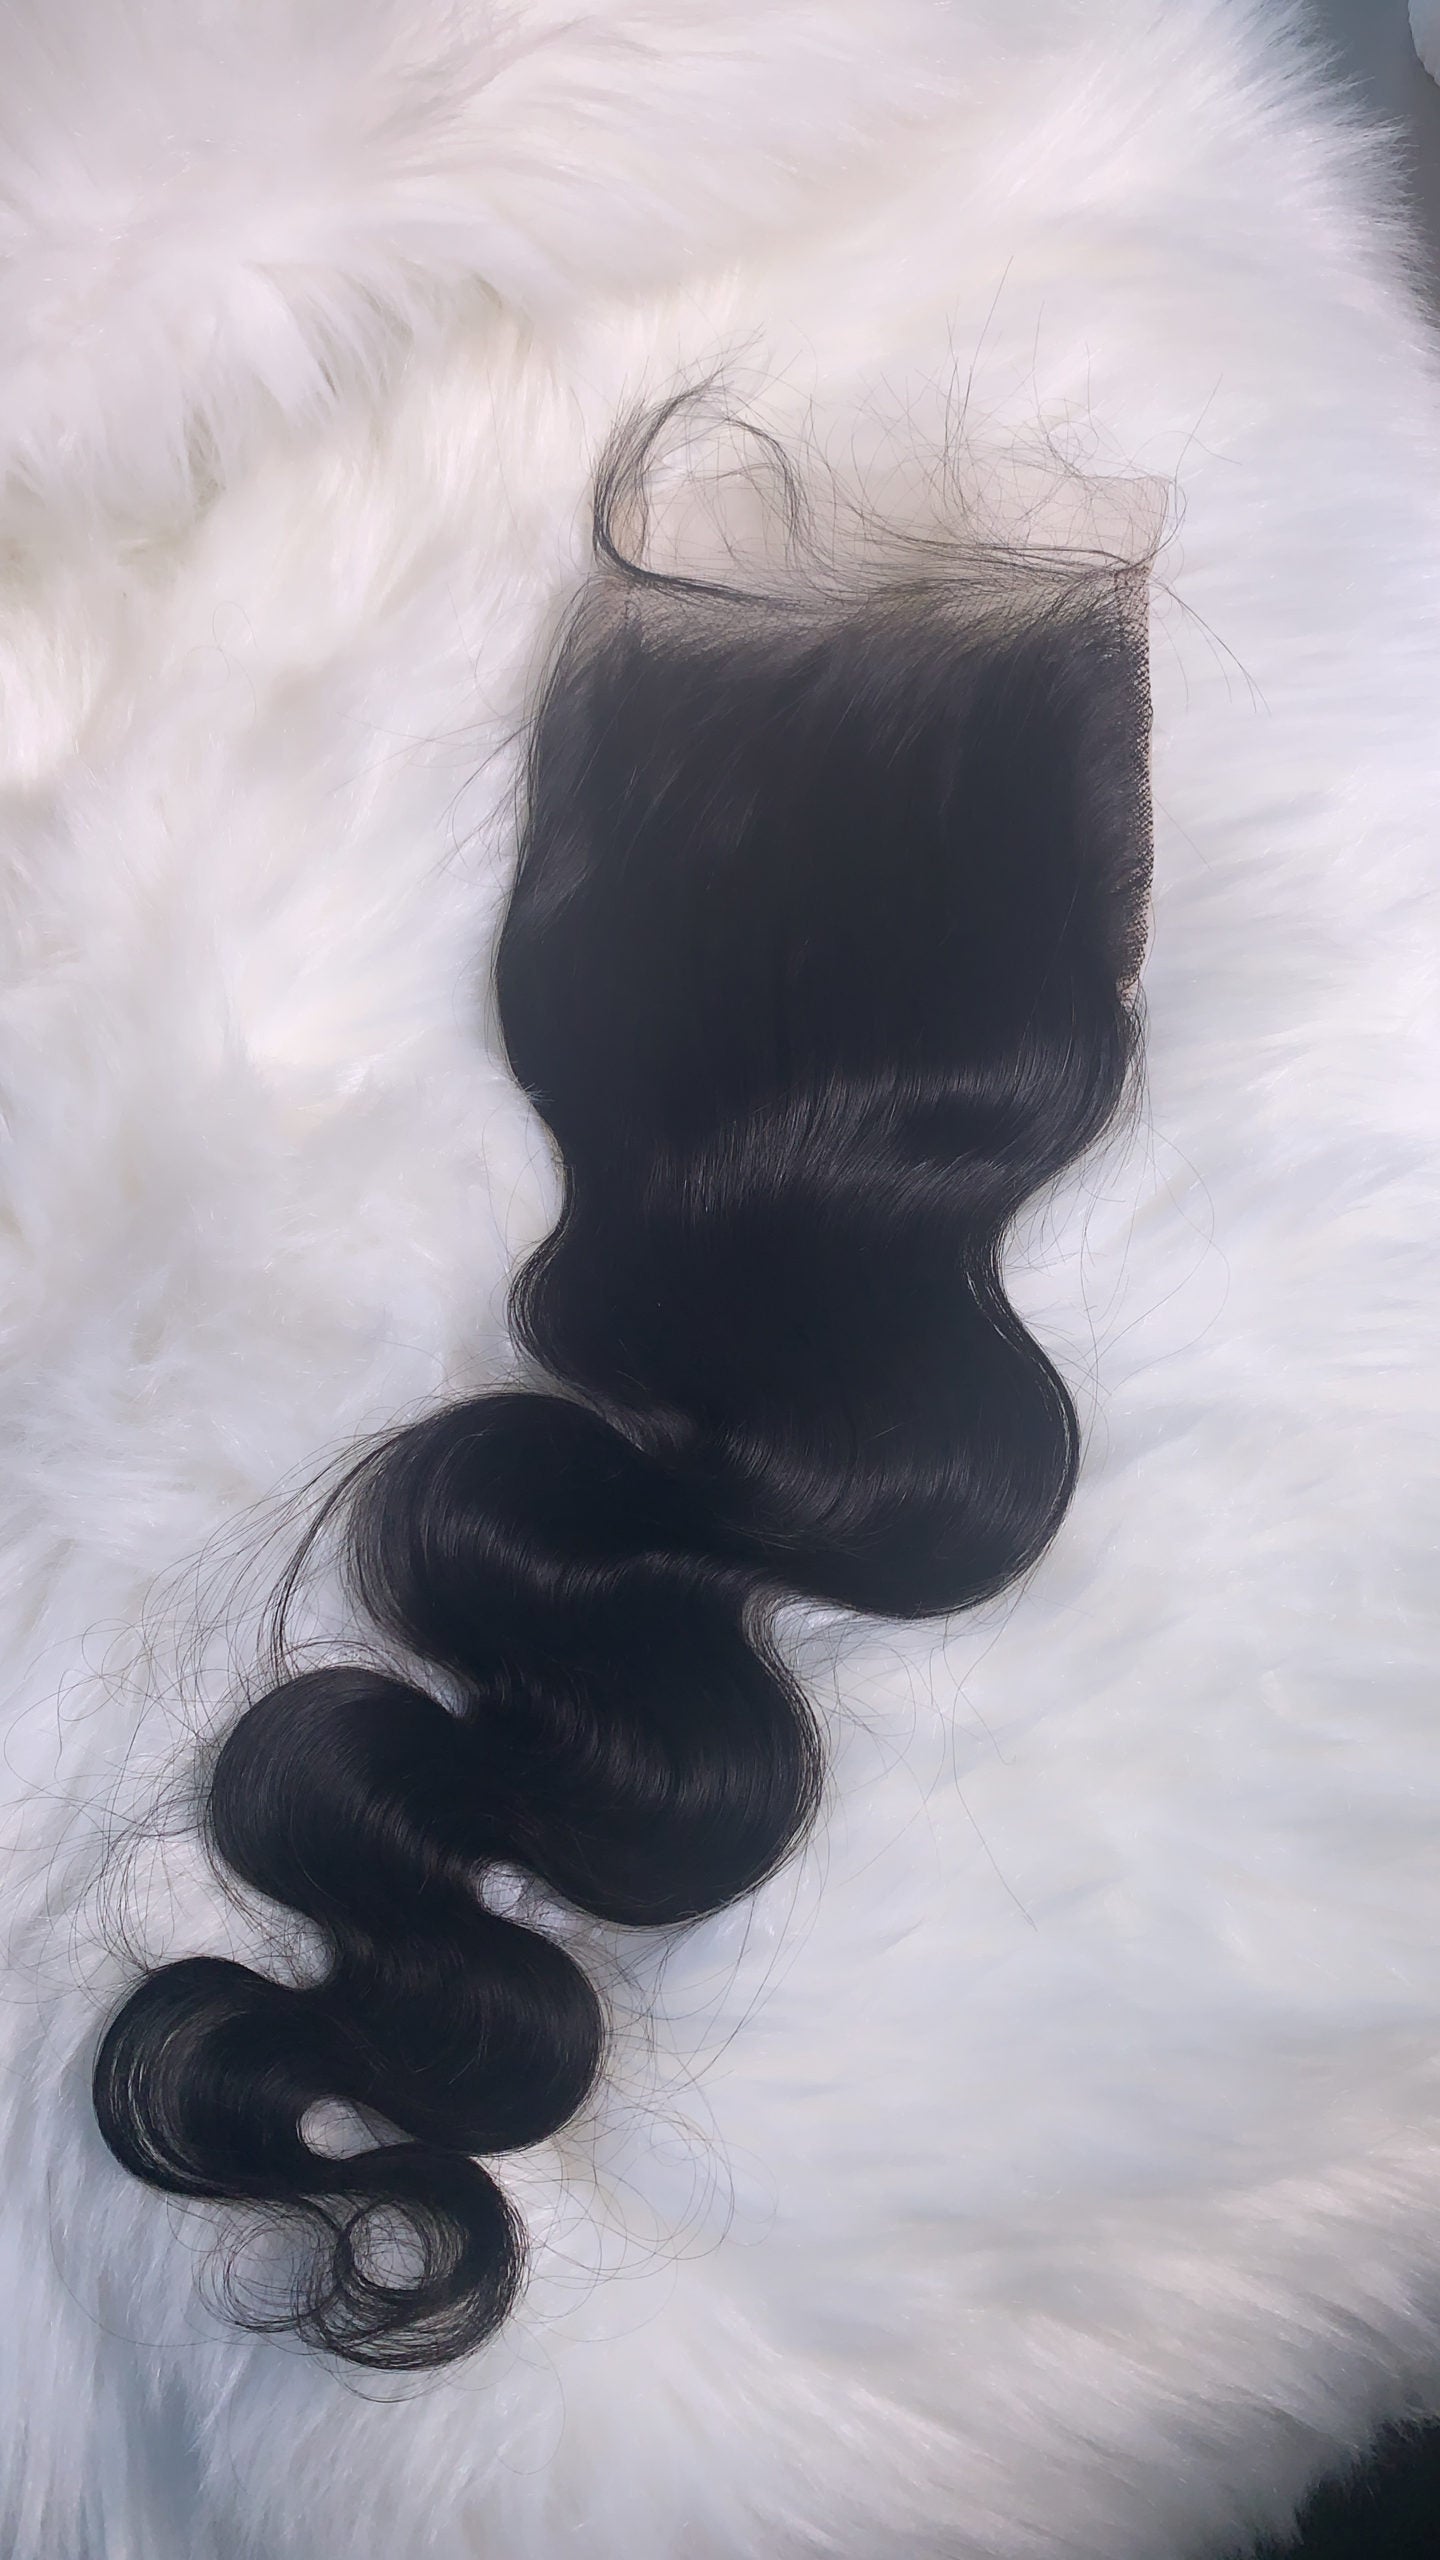 INVISILACE™ 5 by 5 CLOSURE (BODY WAVE) - The Frontal Queen